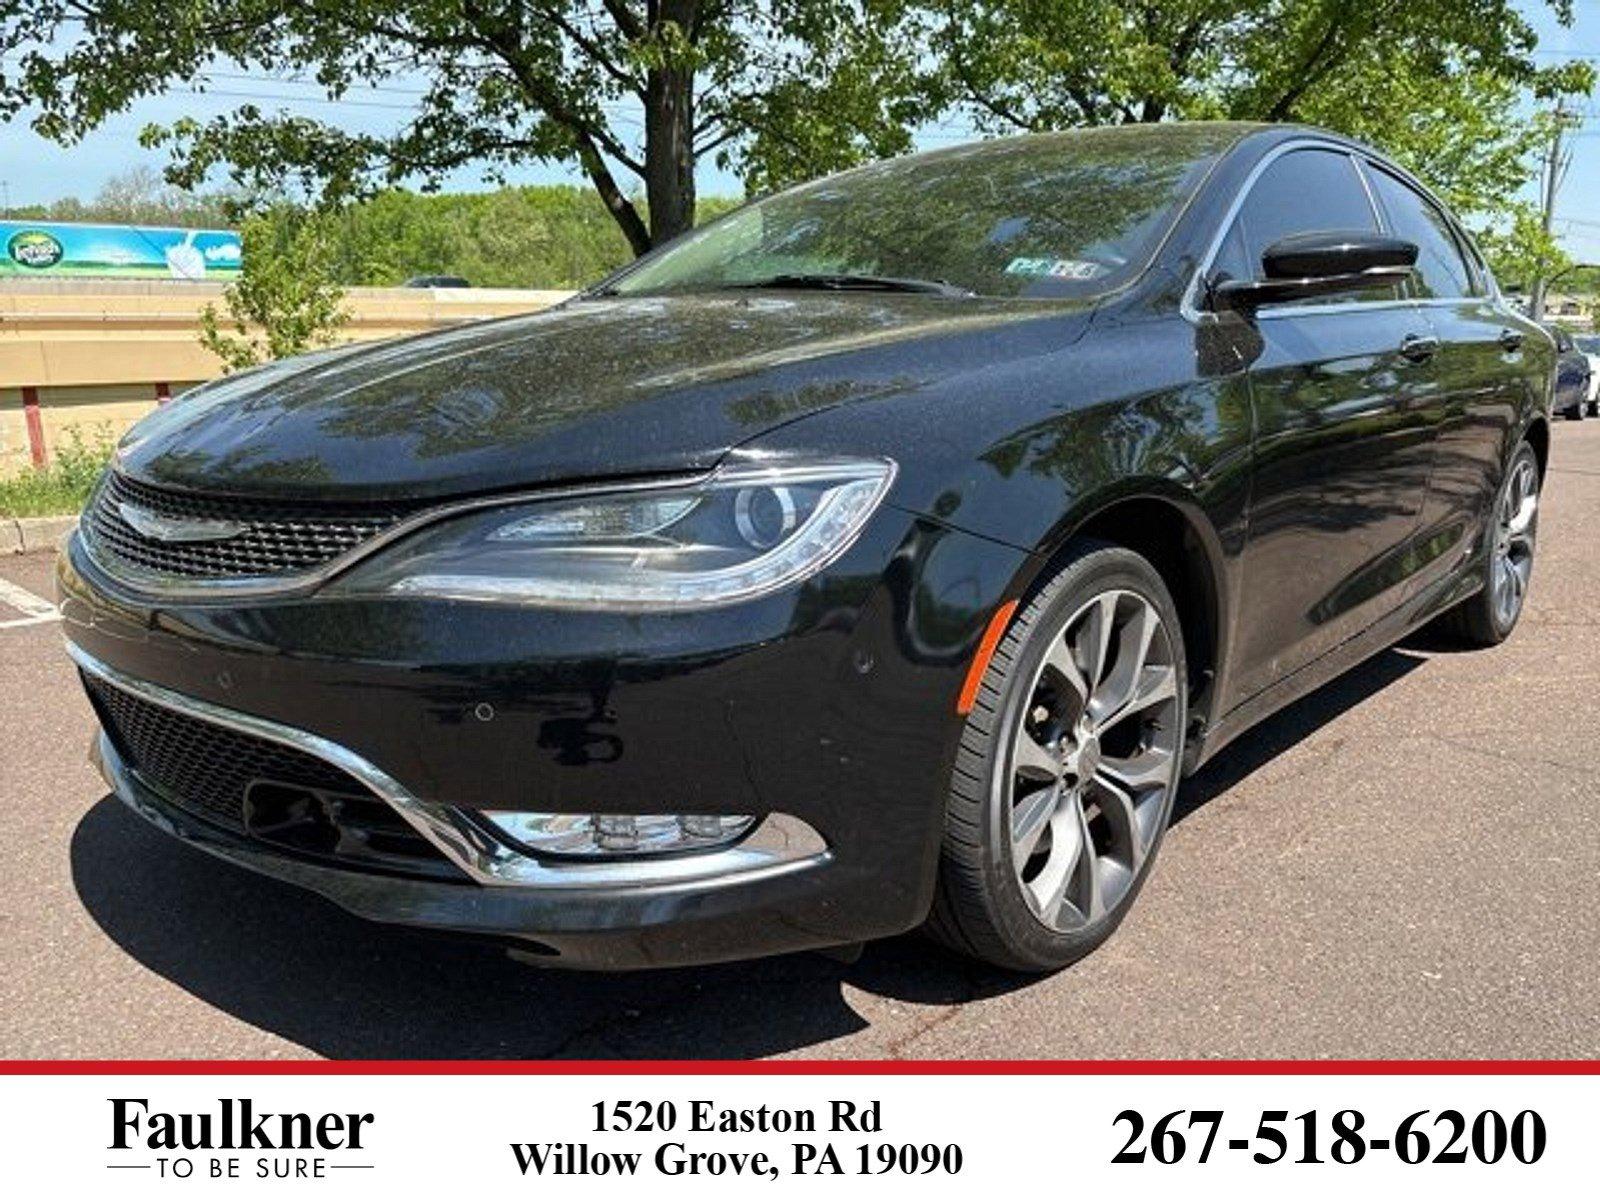 2015 Chrysler 200 Vehicle Photo in Willow Grove, PA 19090